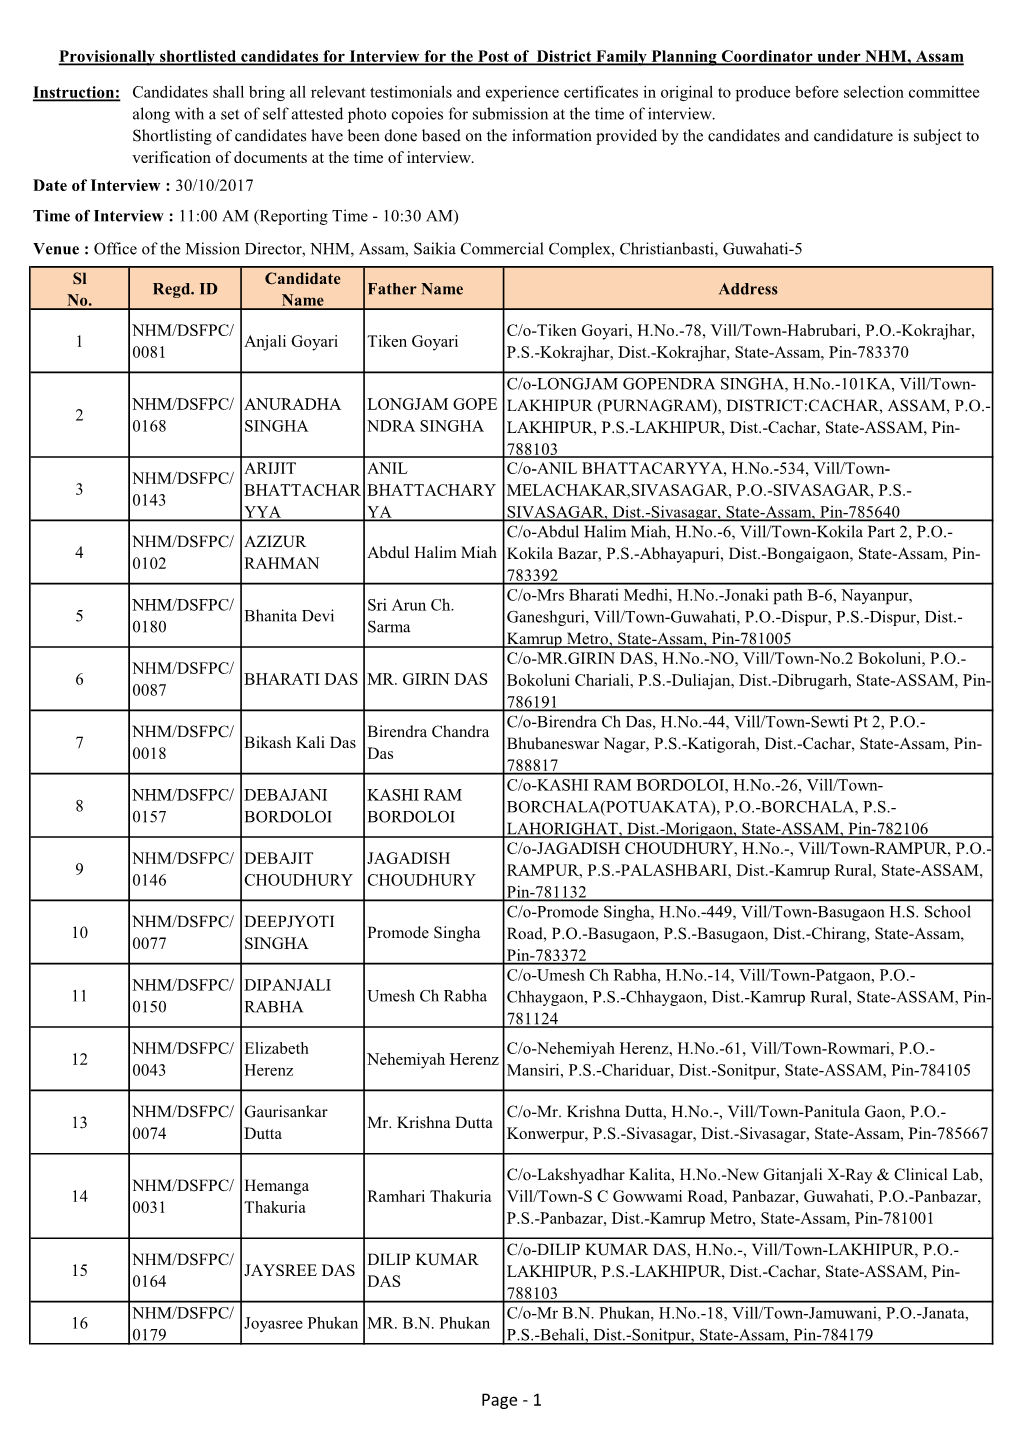 Page - 1 Provisionally Shortlisted Candidates for Interview for the Post of District Family Planning Coordinator Under NHM, Assam